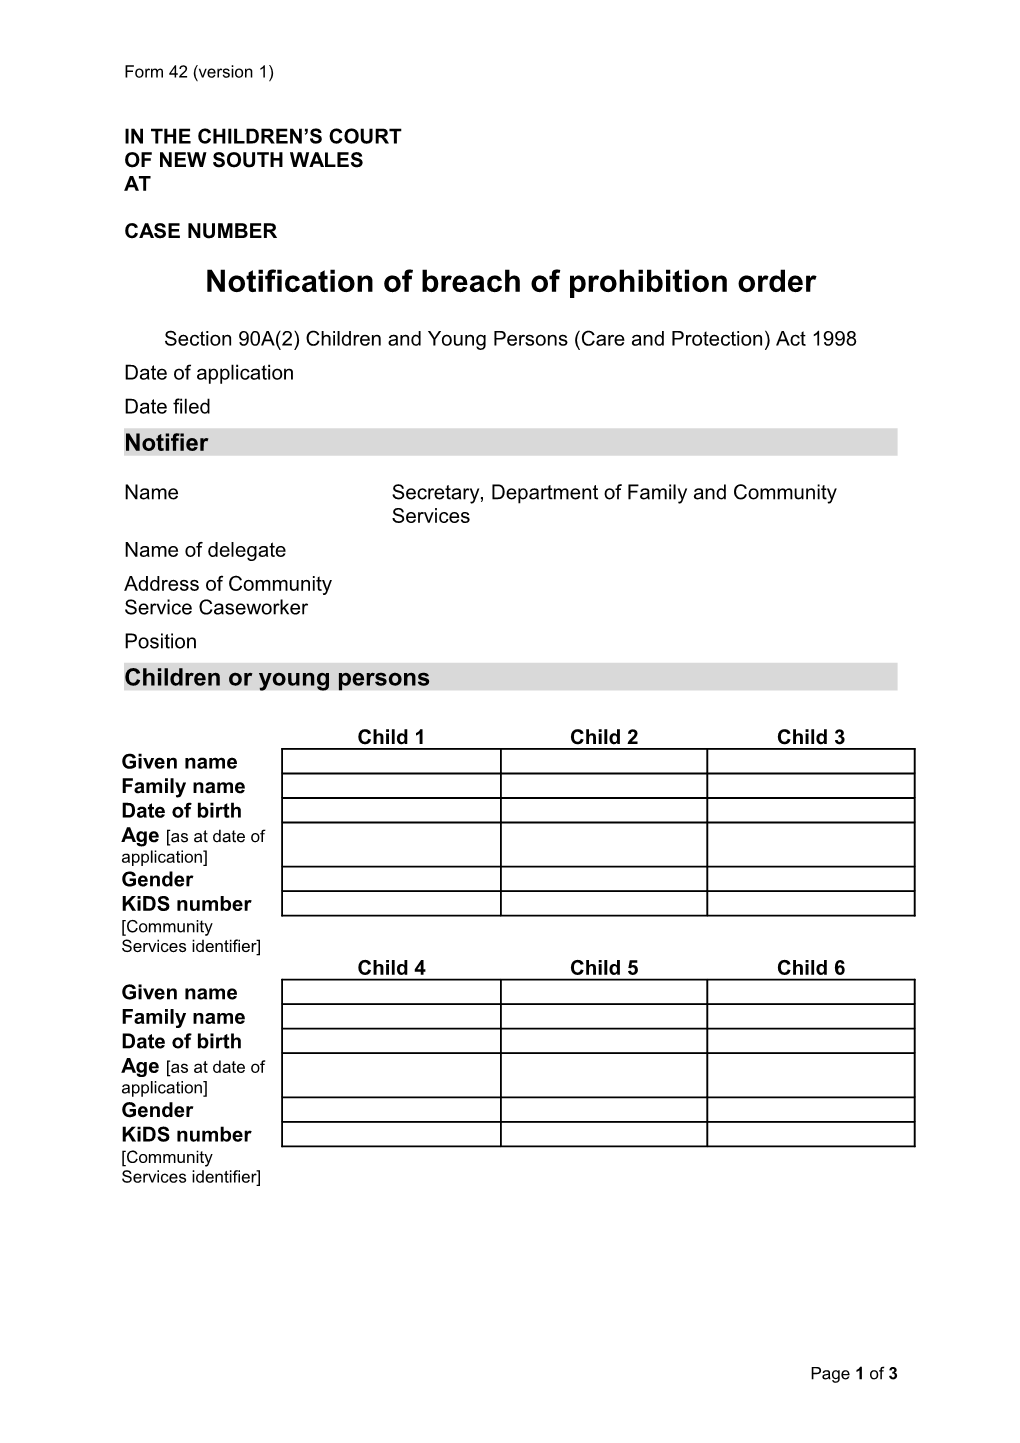 Notification of Breach of Prohibition Order